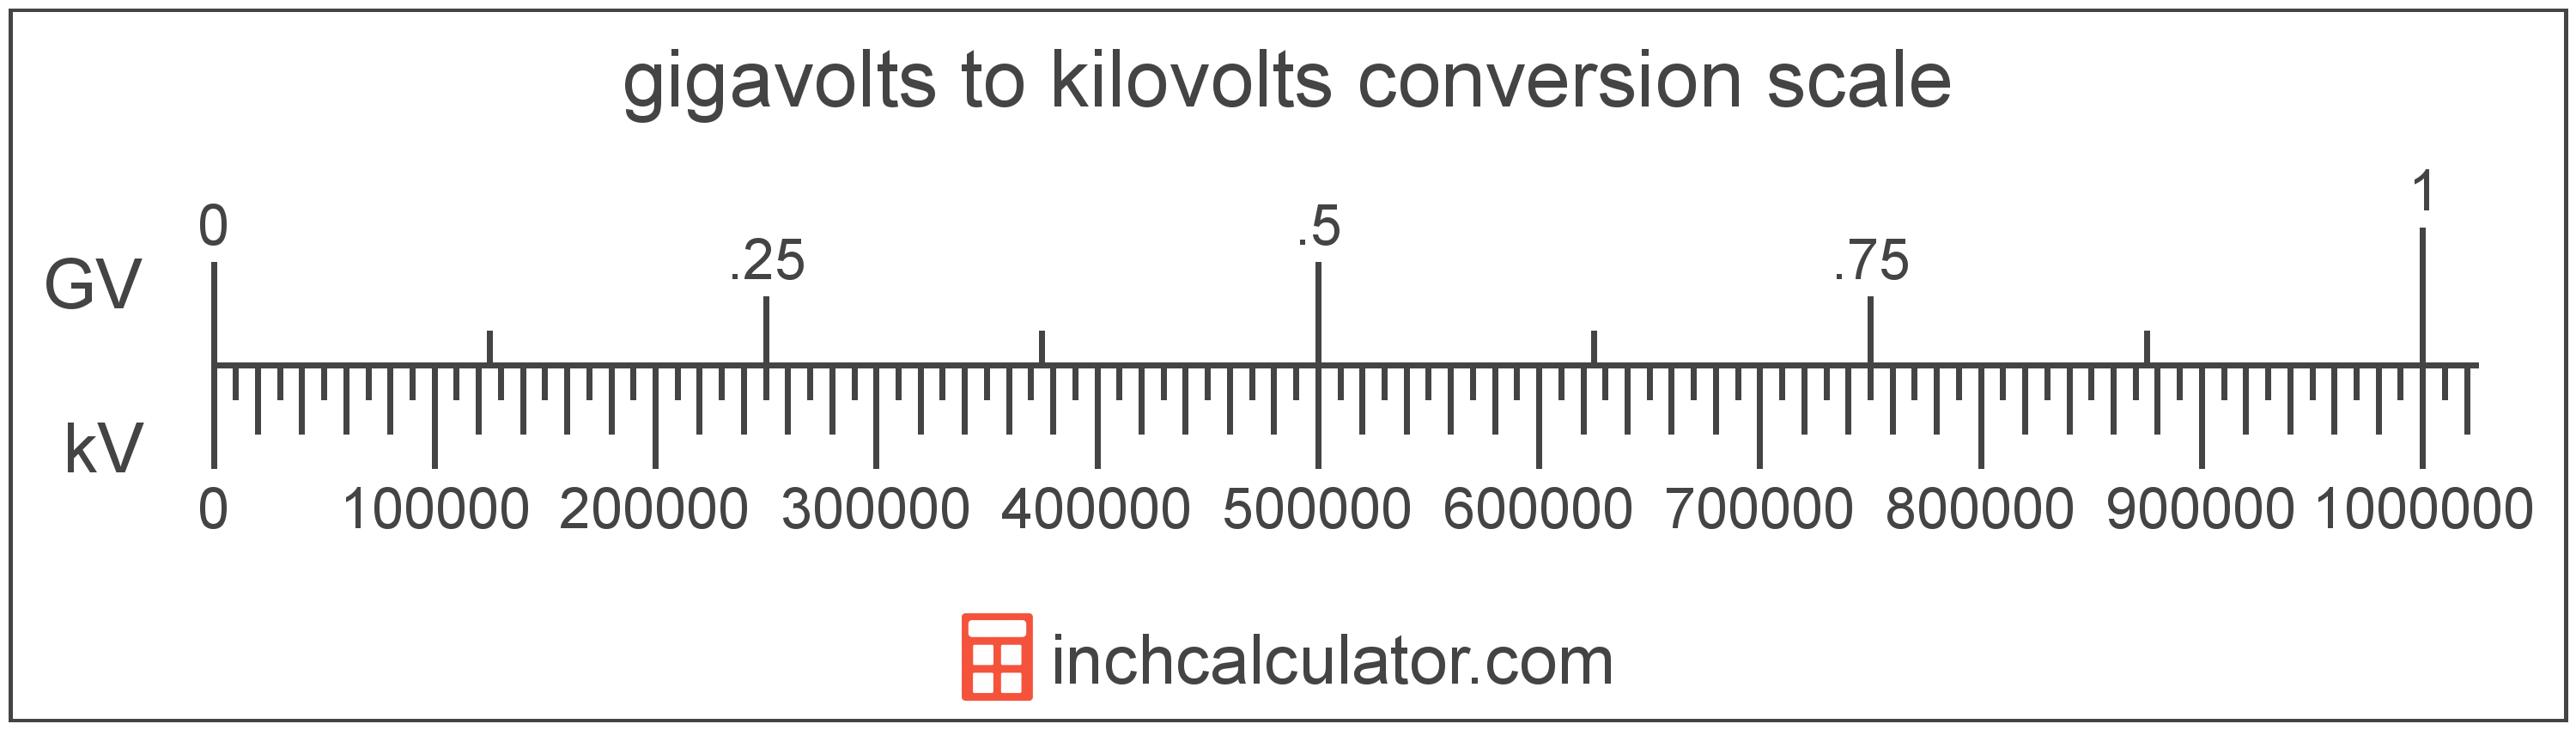 conversion scale showing kilovolts and equivalent gigavolts voltage values